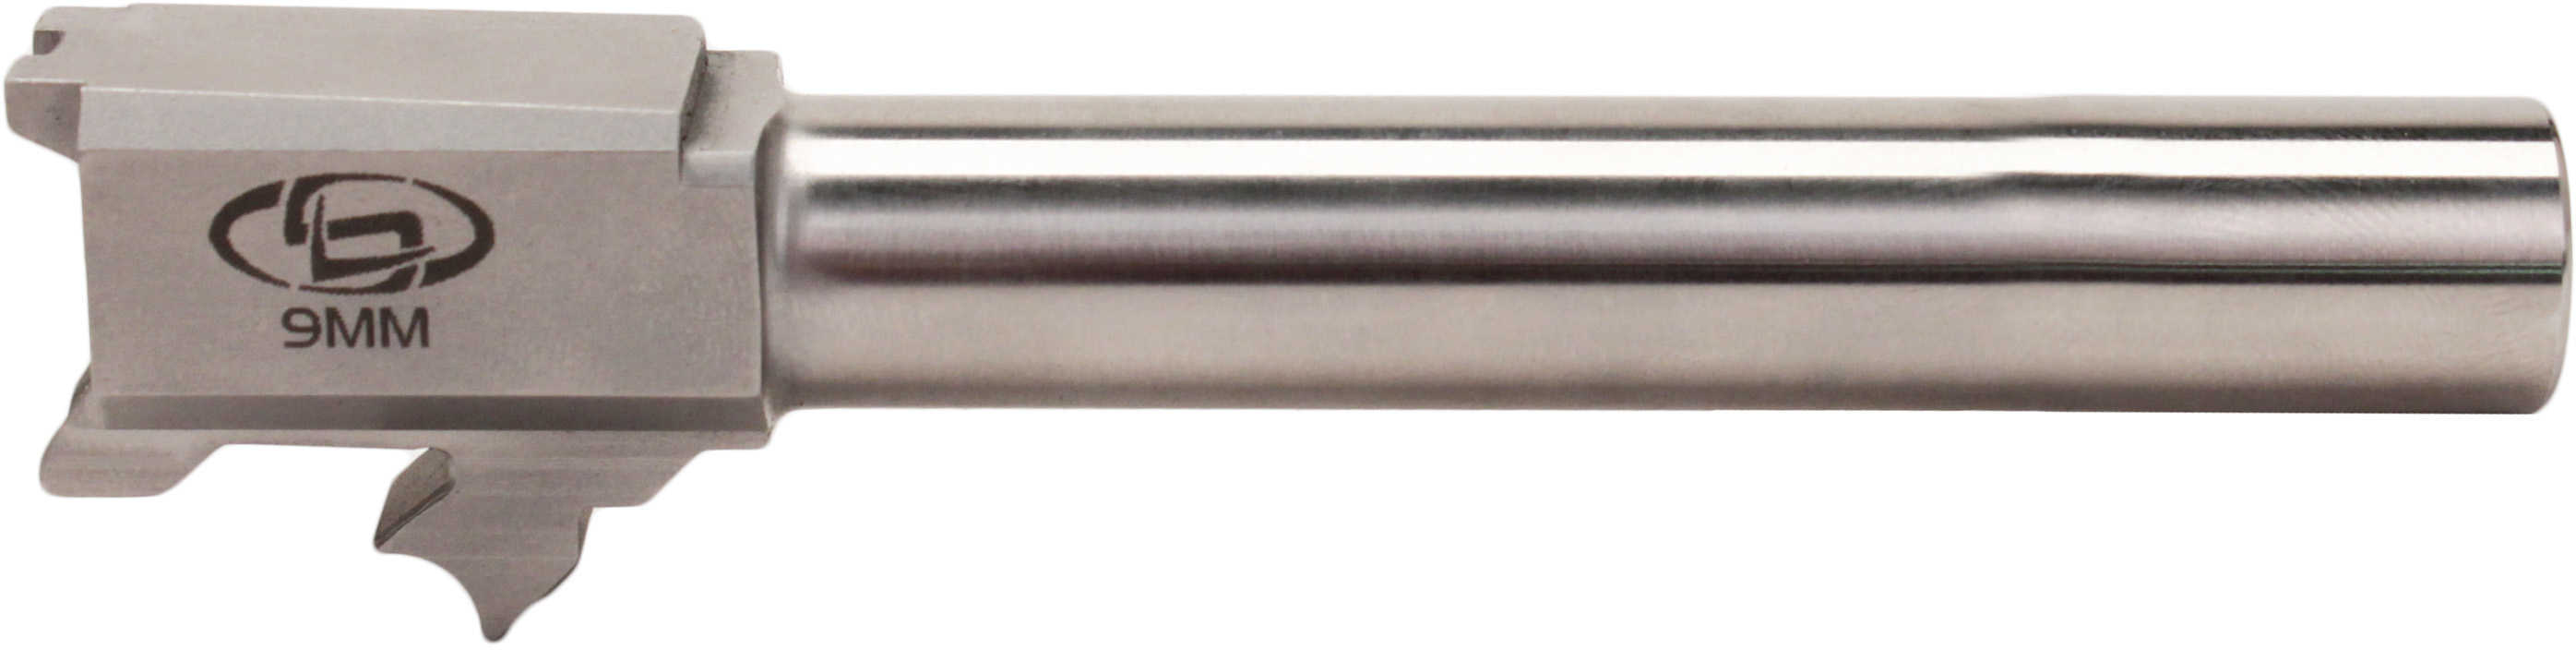 StormLake Barrels Springfield 9mm Conversion for 40 S&W/357 Sig 4.6" Stainless Steel SF-XDM45-9MMC-460